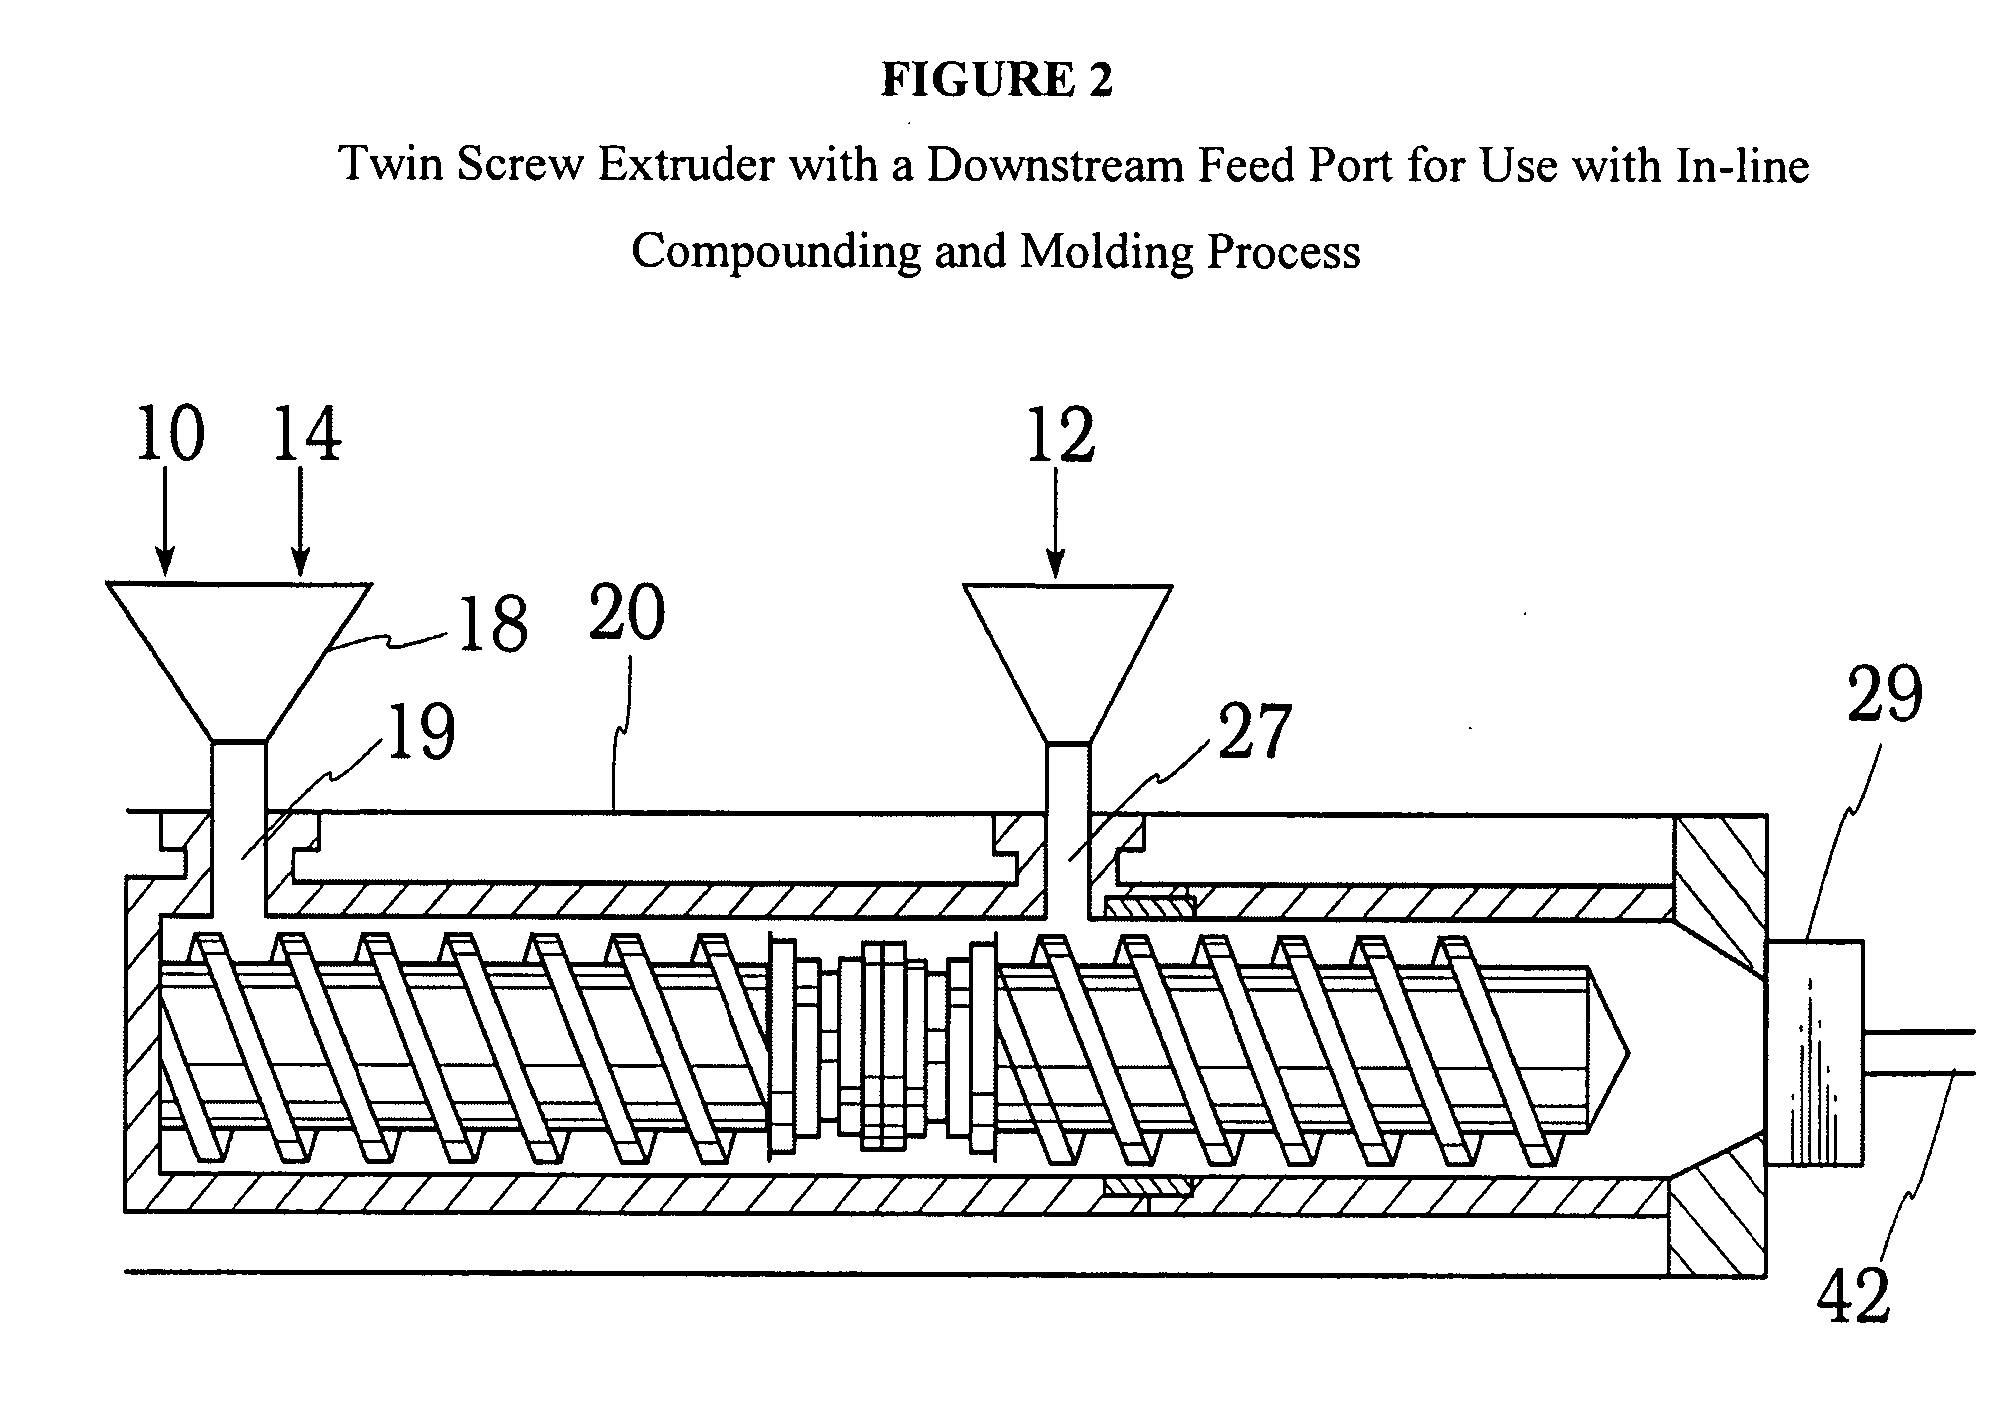 In-line compounding and molding process for making fiber reinforced polypropylene composites